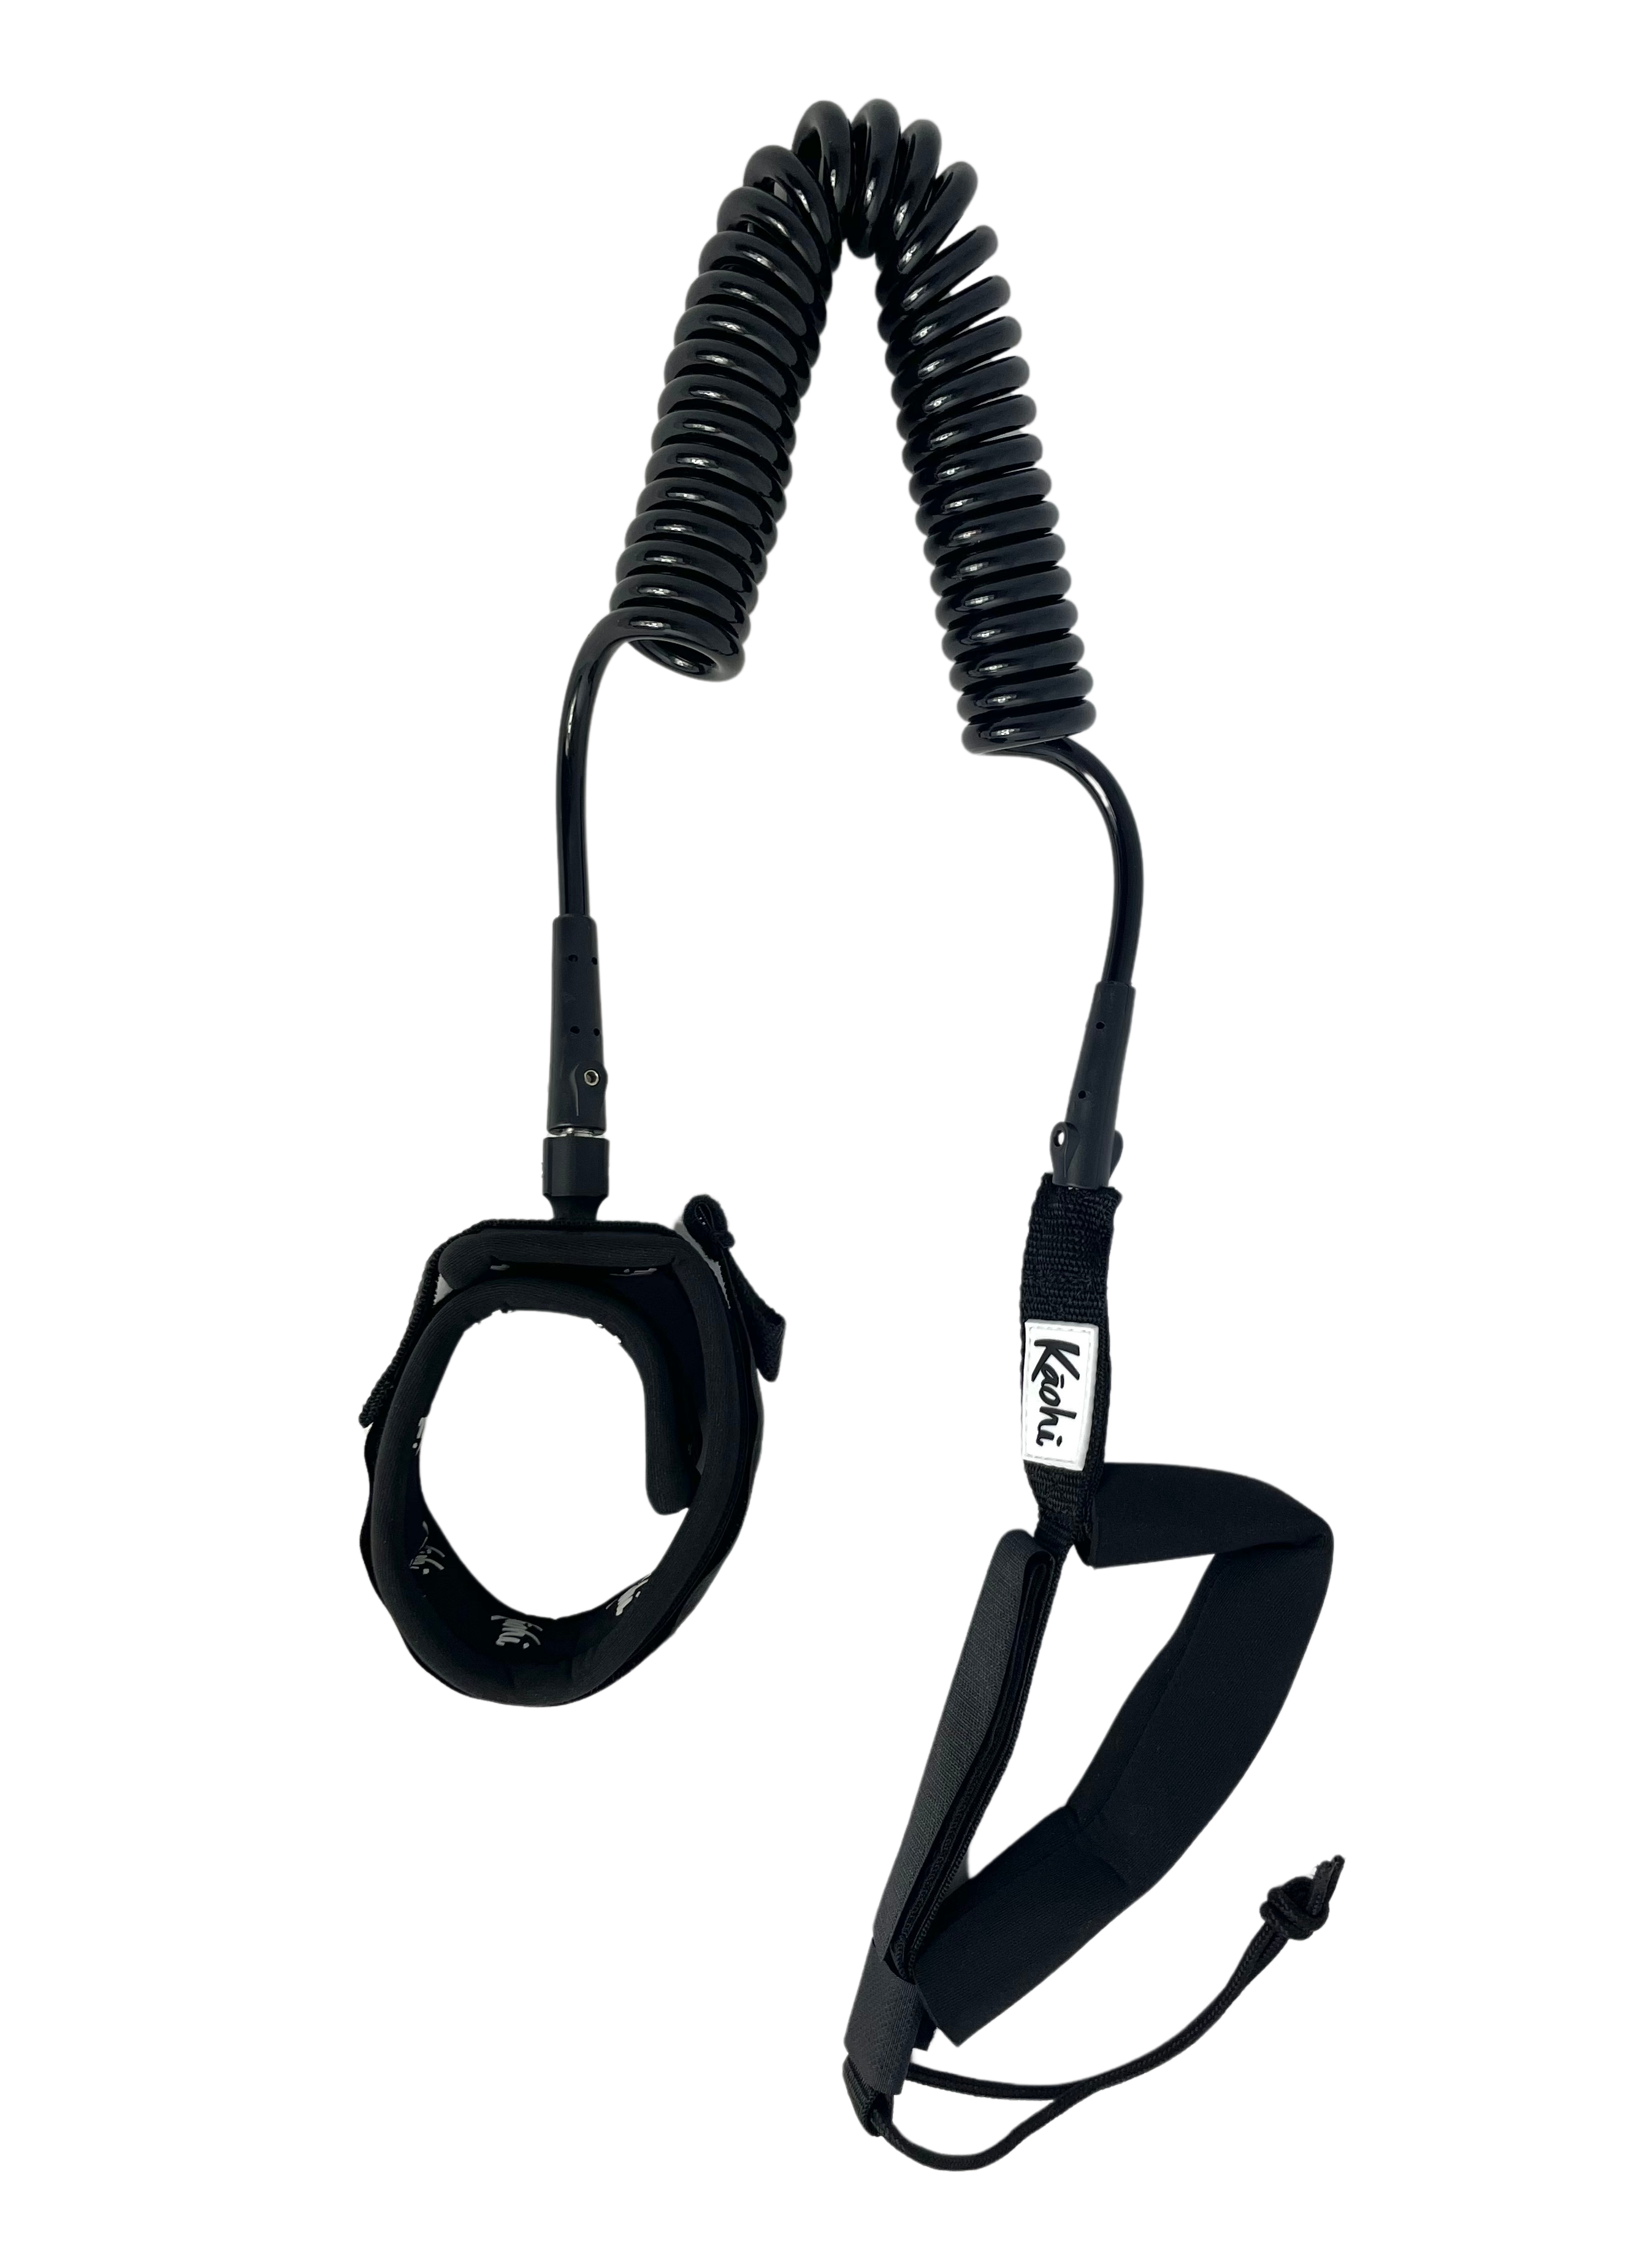 coil surfing leash for SUP , Foil board, Surfboard with GRIP rail saver handle ankle cuff calf cuff Black